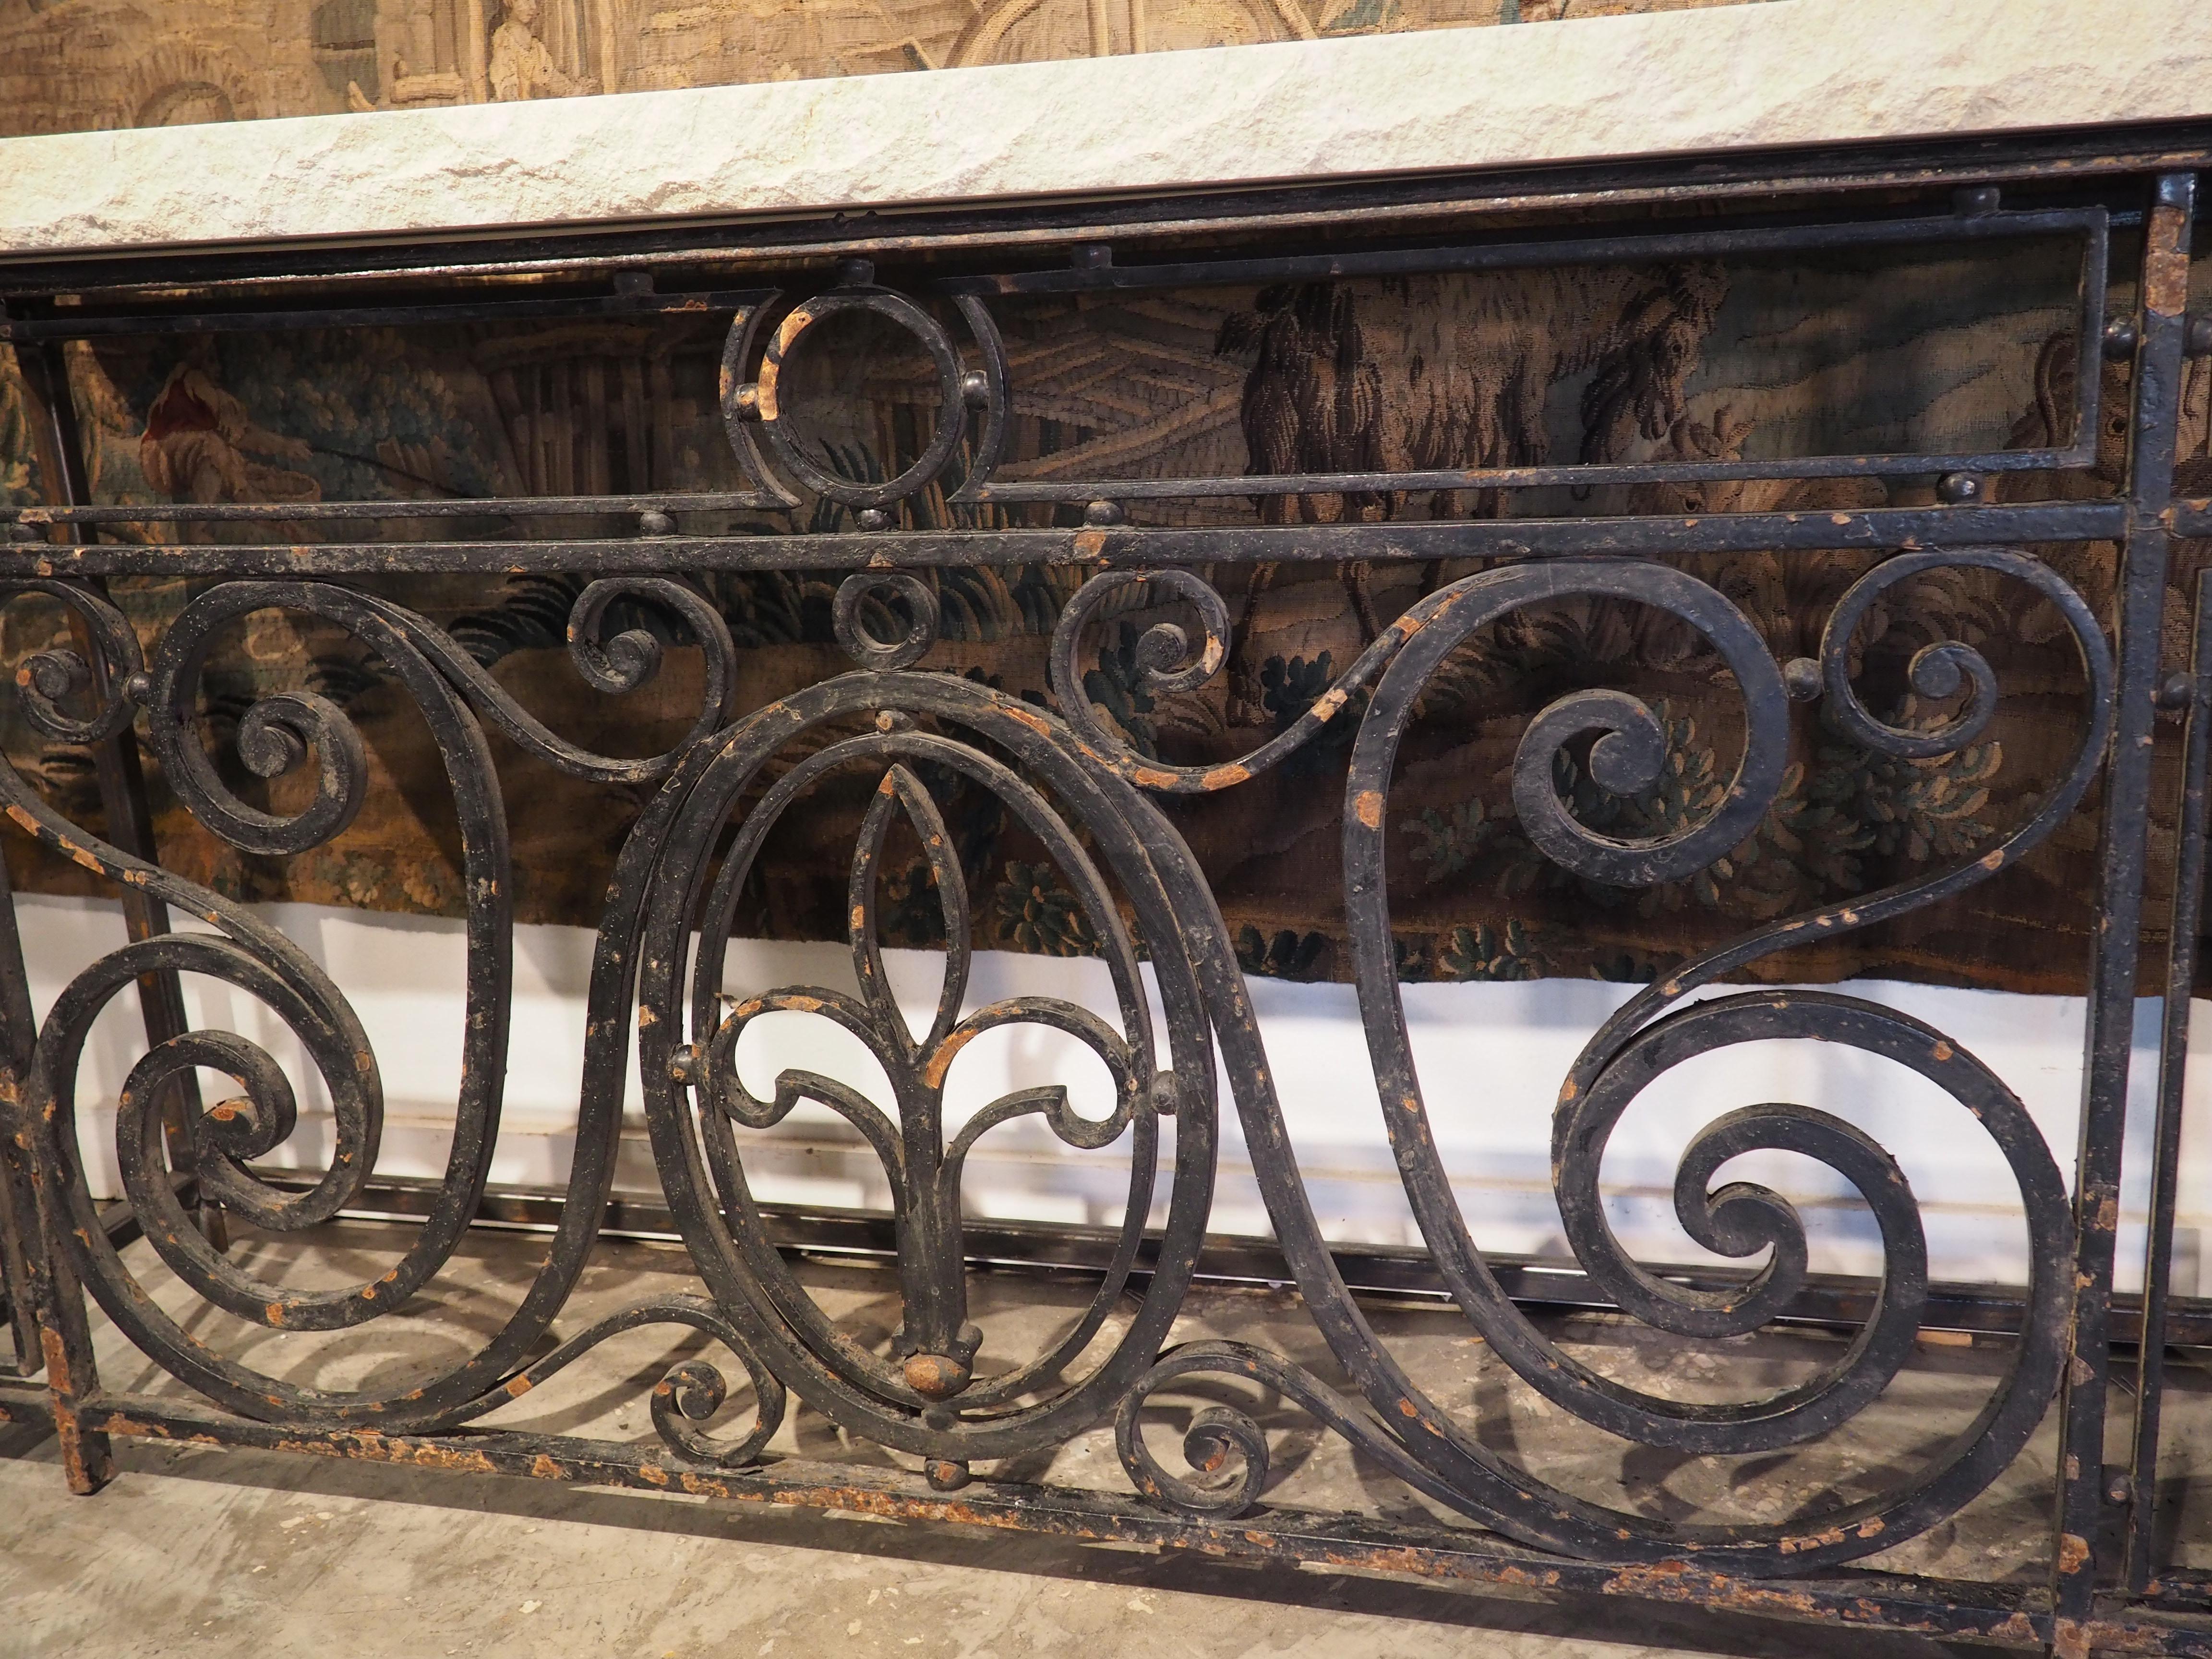 Originally serving as a balcony barrier on a French-style building in Argentina, this wrought iron railing was produced in the early 1900’s. We have repurposed the iron into a console table with a hand-cut pitched limestone top. At over two inches